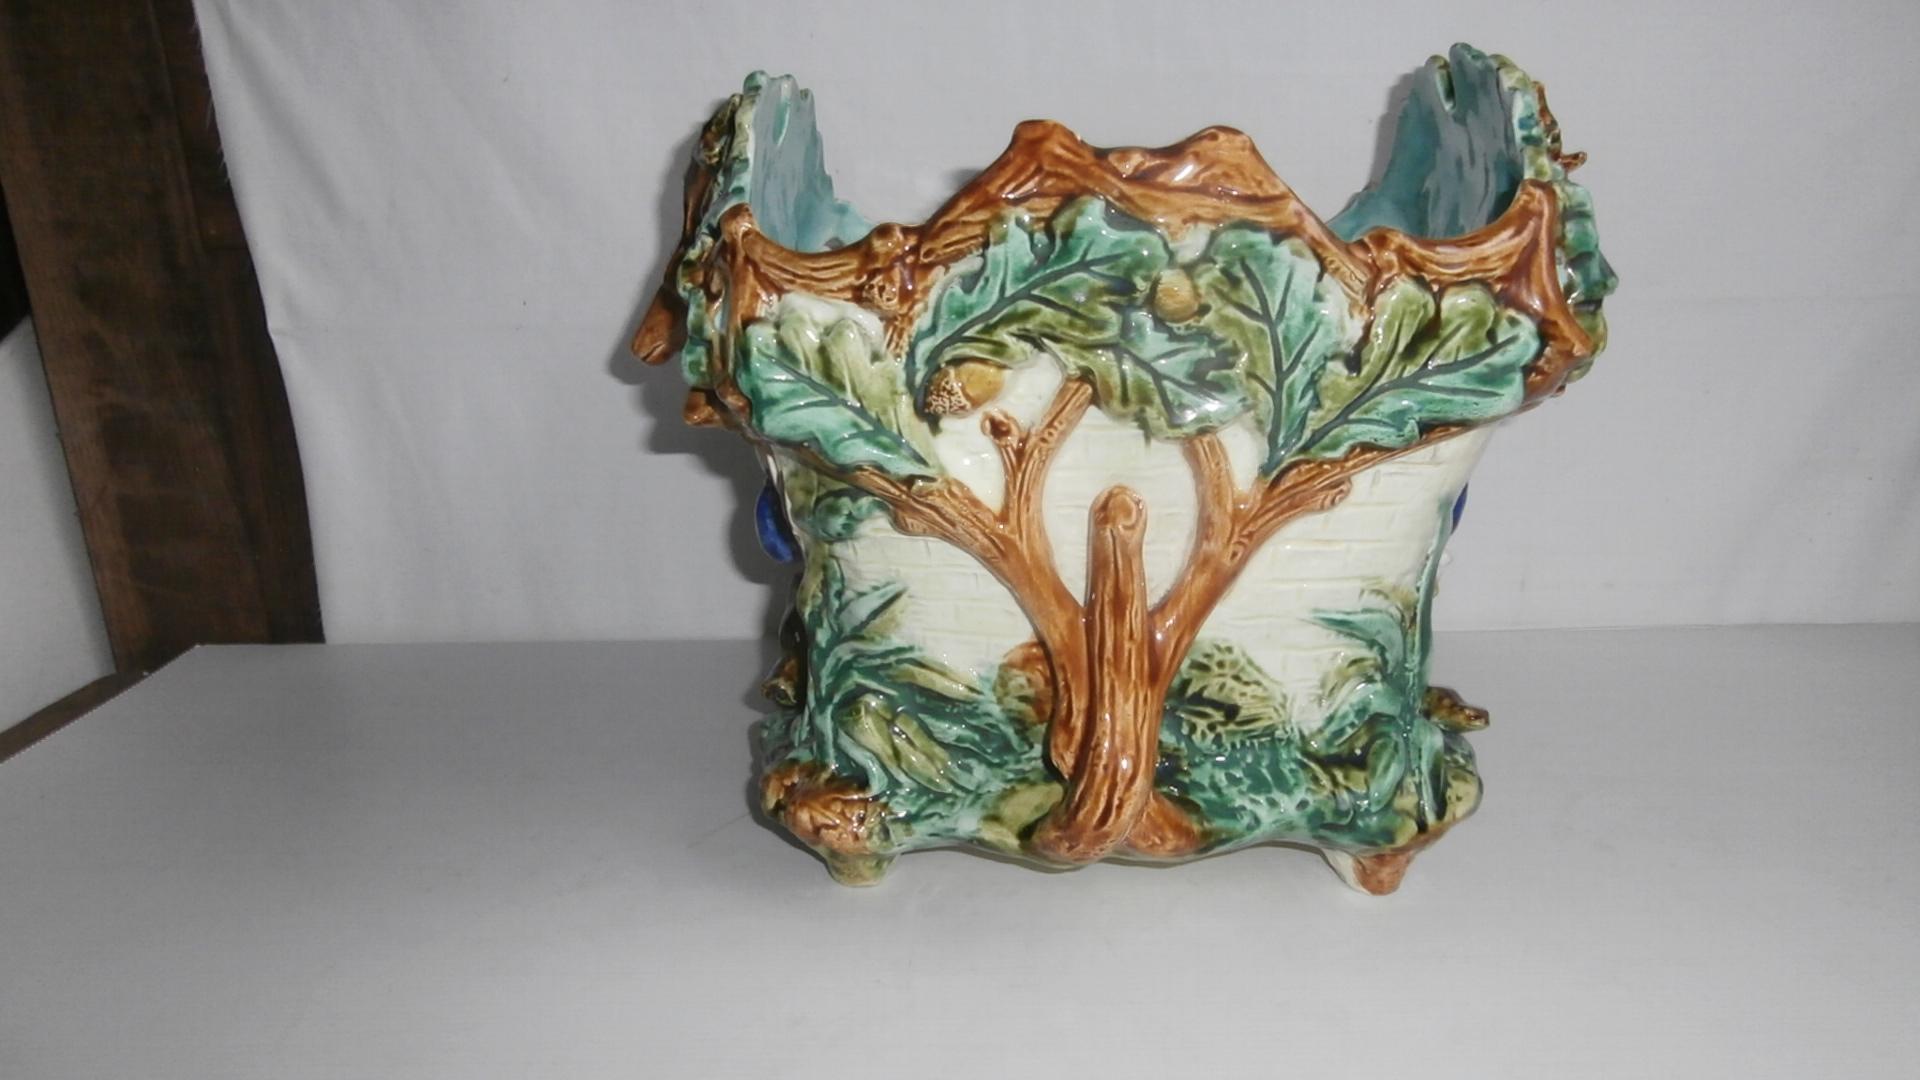 19th century square Majolica hunt jardinière signed Onnaing.
The planter is decorated with a deer head on the front, oak leaves and acorns, hunting symbols ( gamebag, horn and carbine) on the front also a boar head and a goose.
Measures: 9 3/4 x